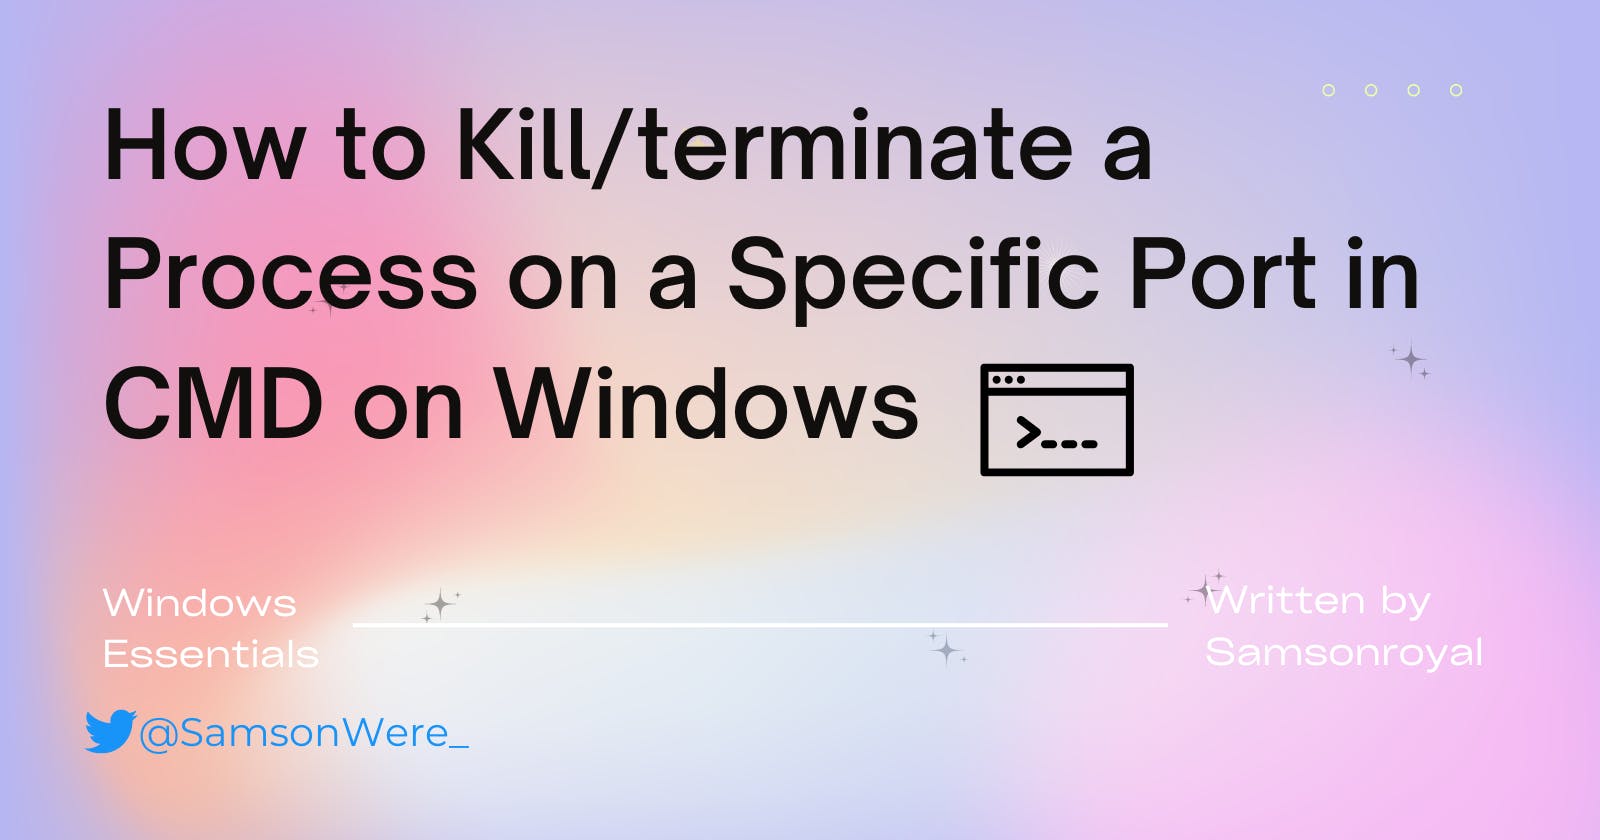 How to Kill/terminate a Process on a Specific Port in CMD on Windows